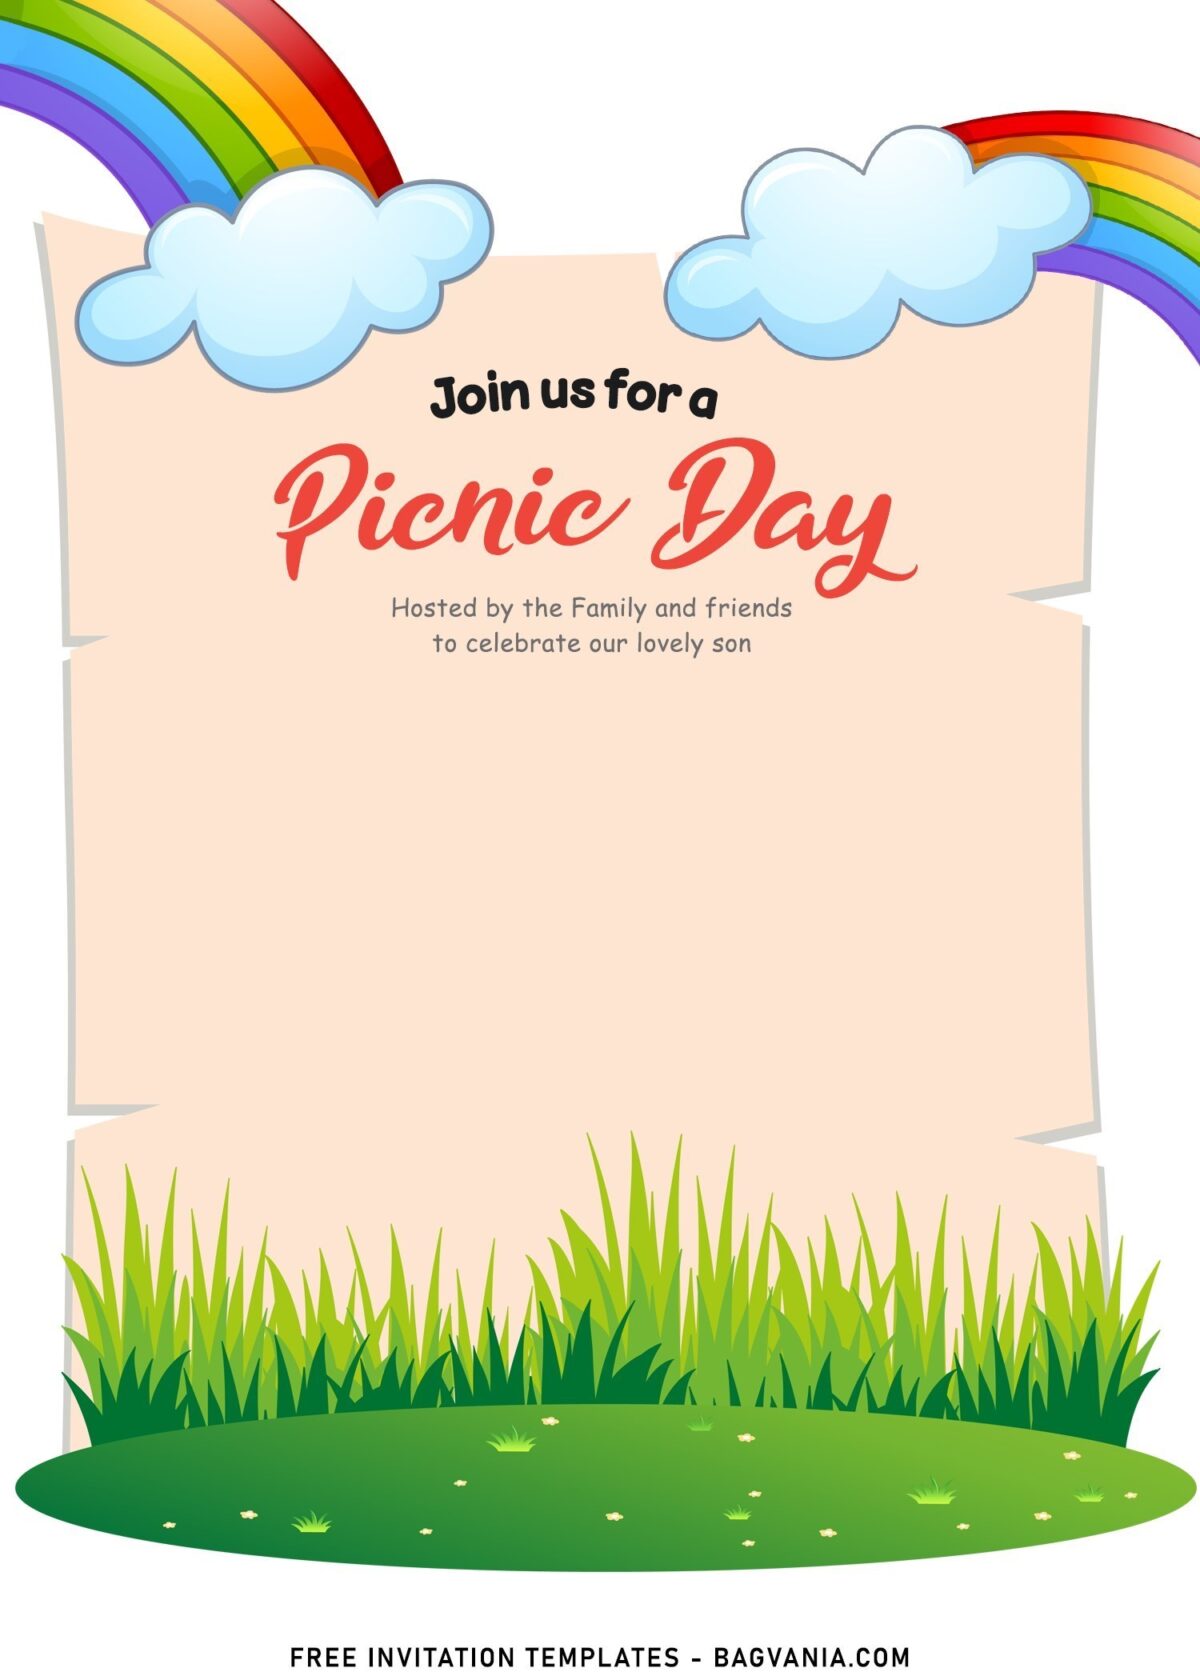 11+ Kids Picnic Day Birthday Invitation Templates Perfect For Spring with beautiful park